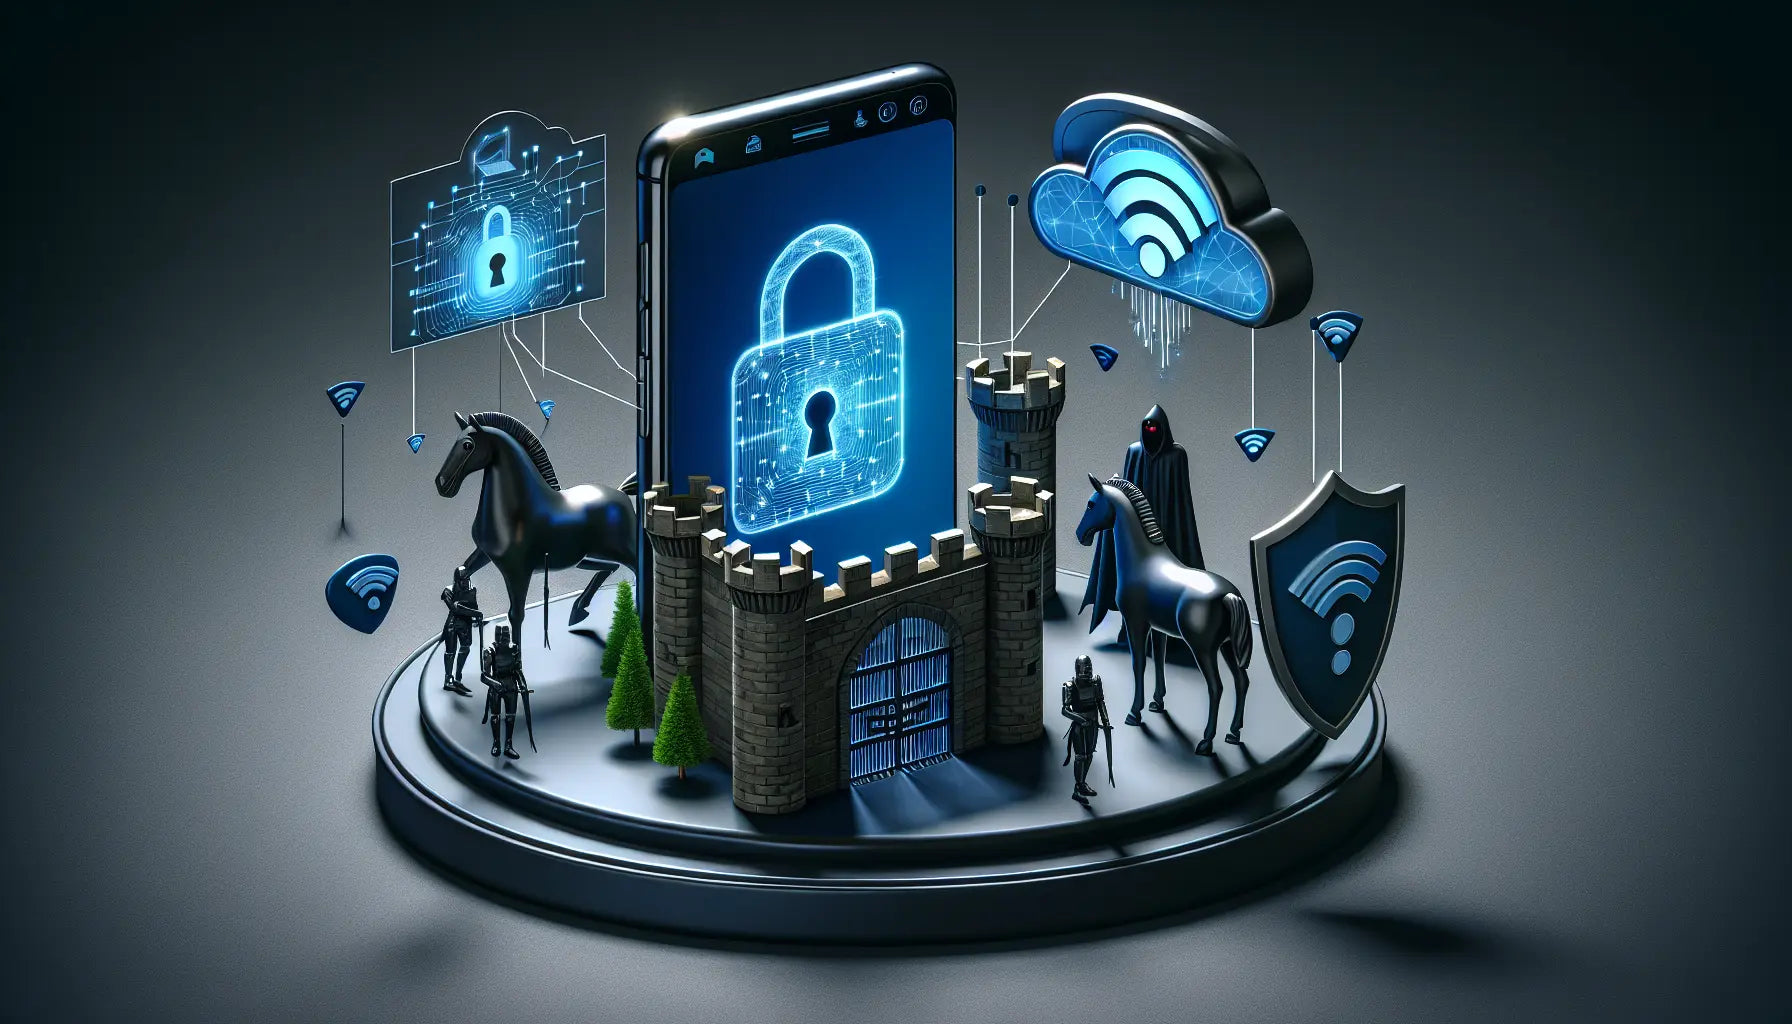 Smartphone Security: How to Protect Your Data